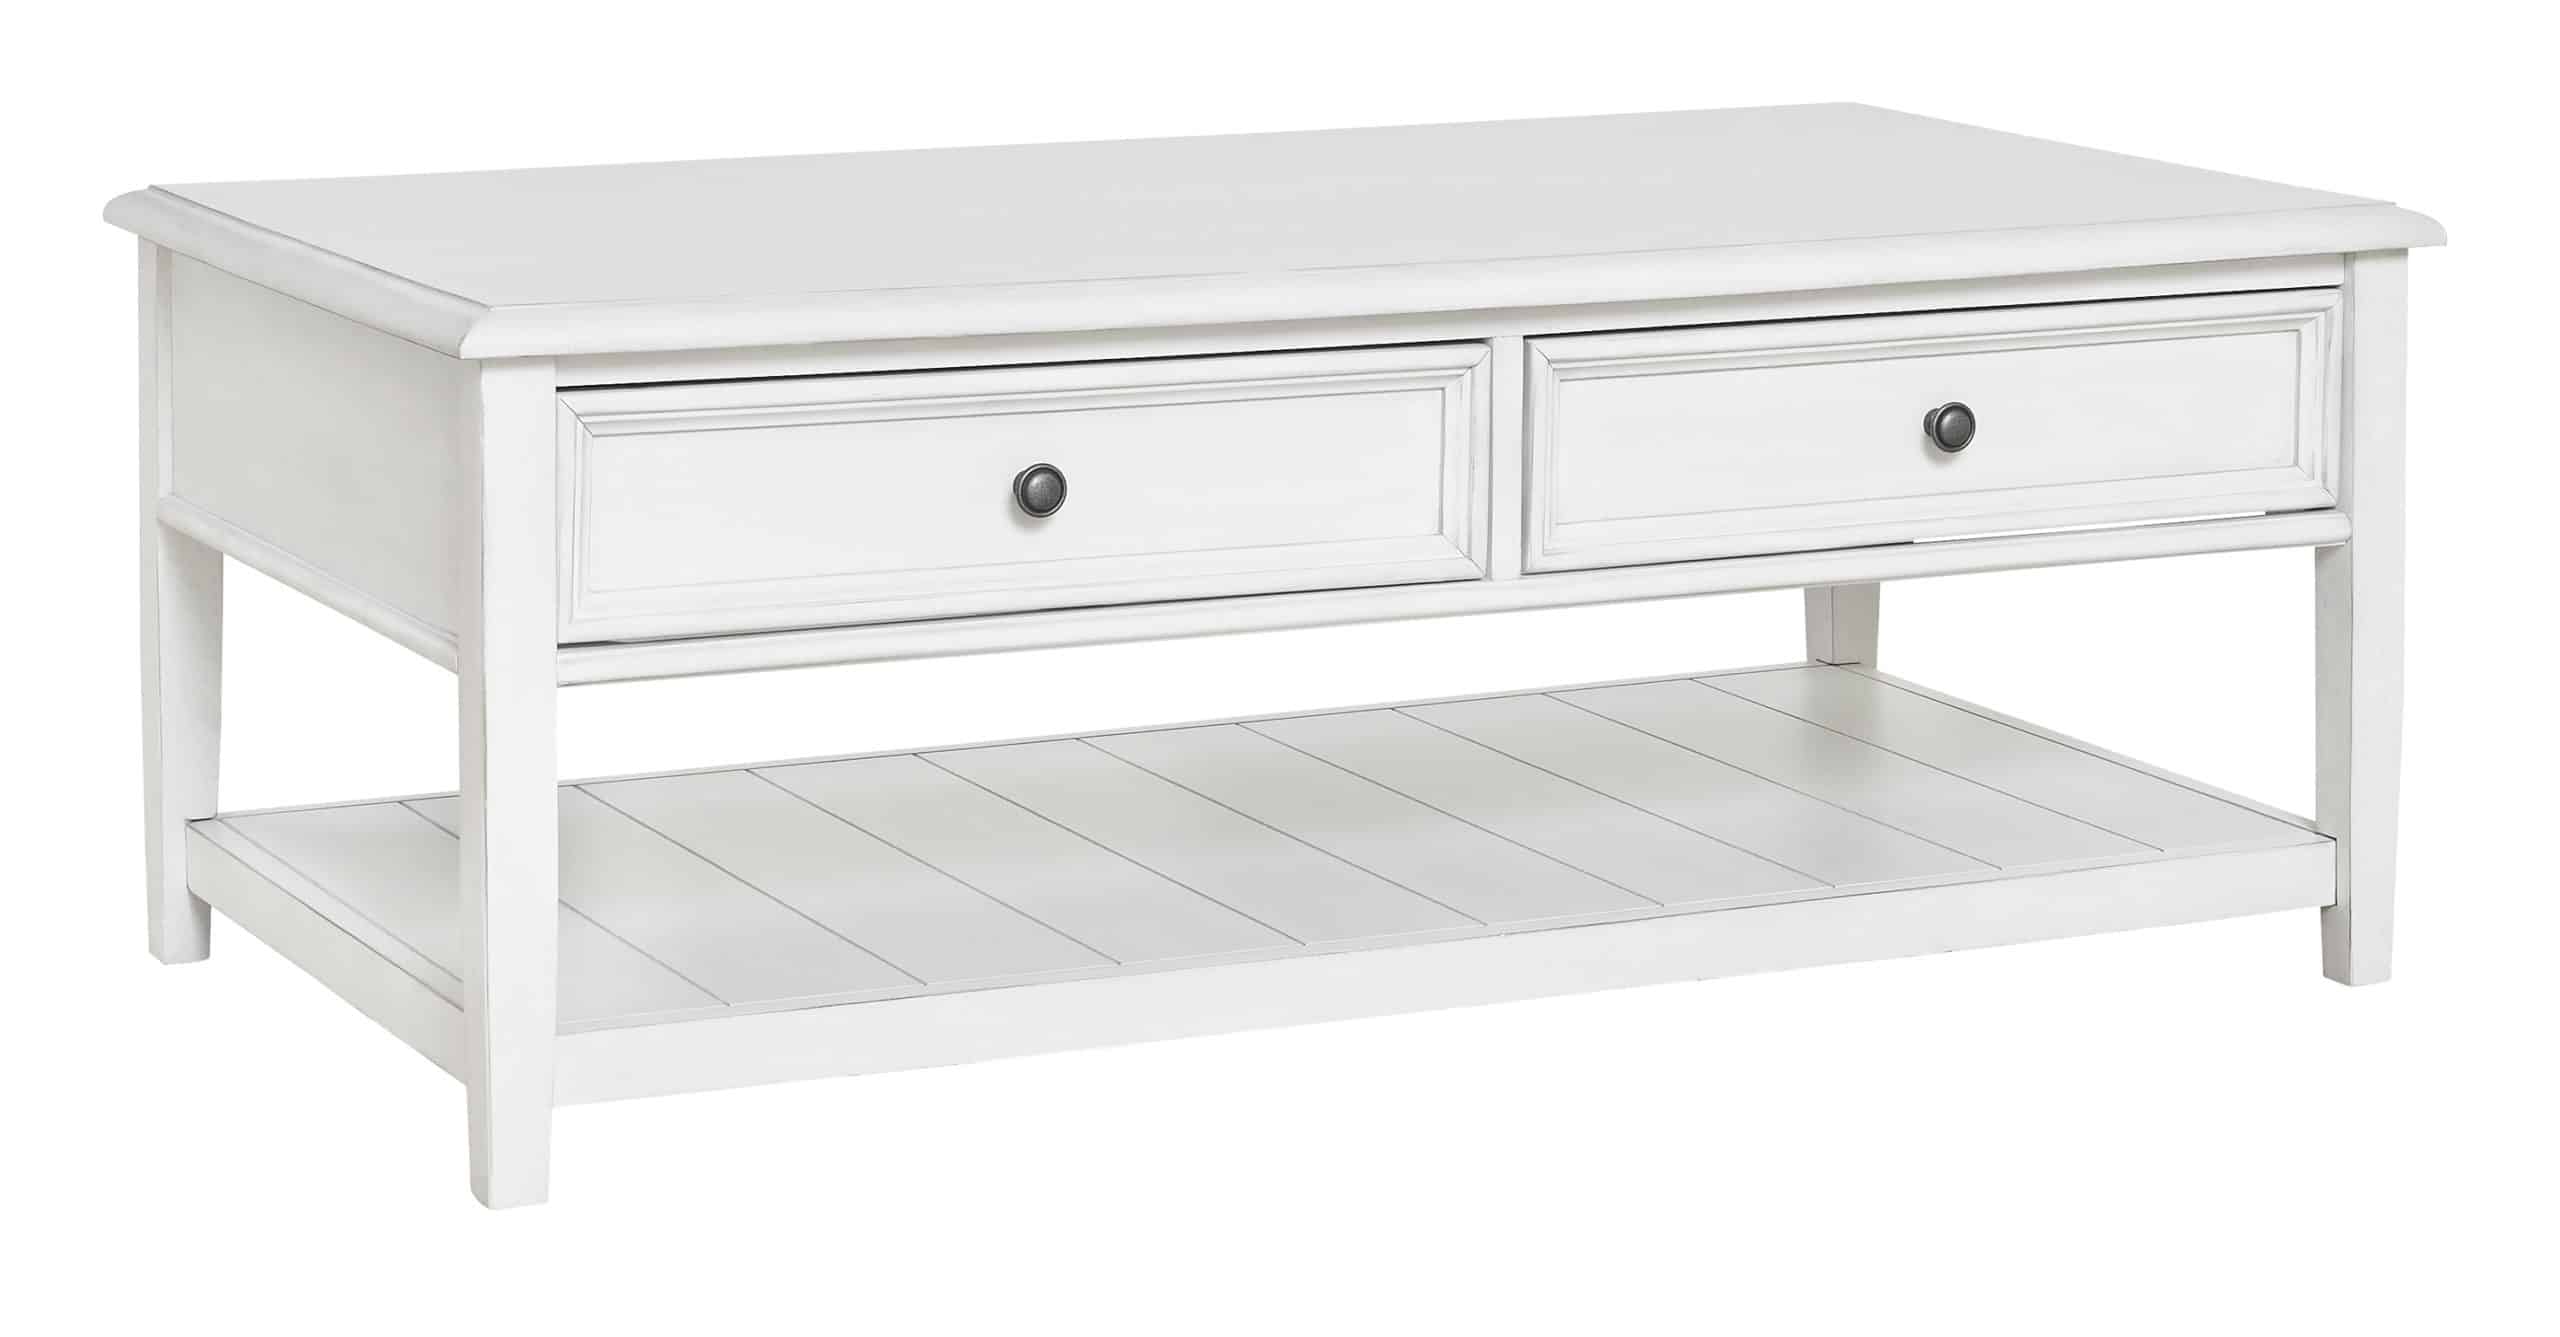 T937-1 Kanwyn Cocktail Table